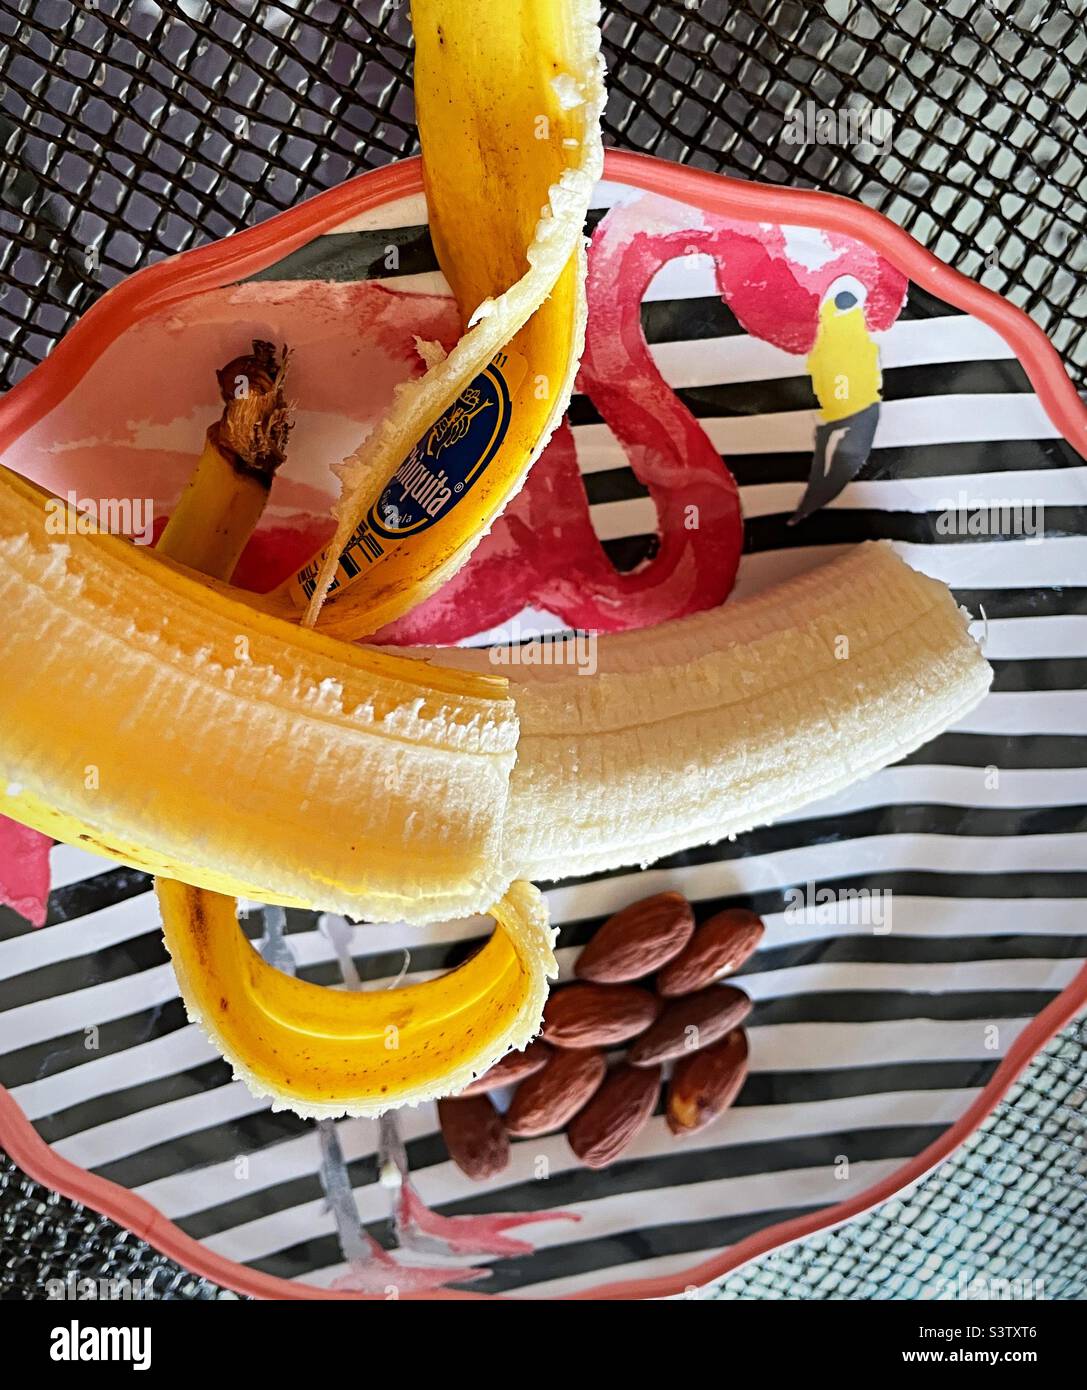 Flat lay of an afternoon snack of a half eaten banana and almonds on a striped flamingo plate, 2022, USA Stock Photo